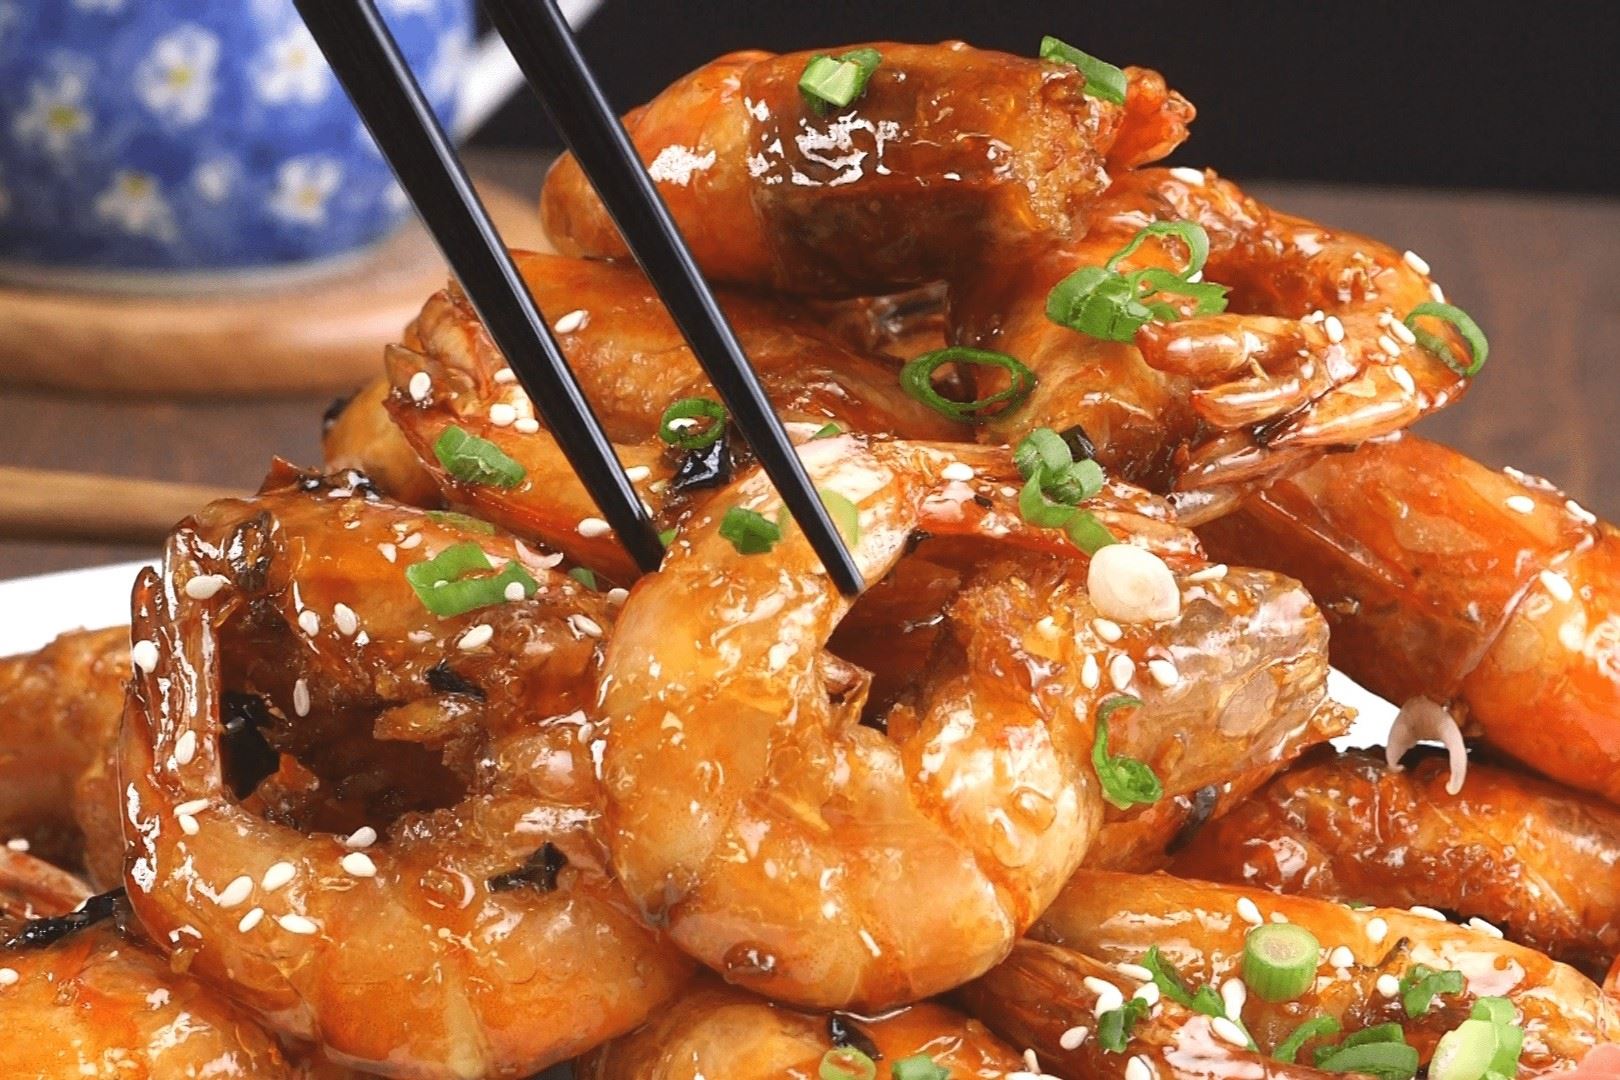 Delicious Chinese Style Fried Shrimp Recipe - A Must-Try!